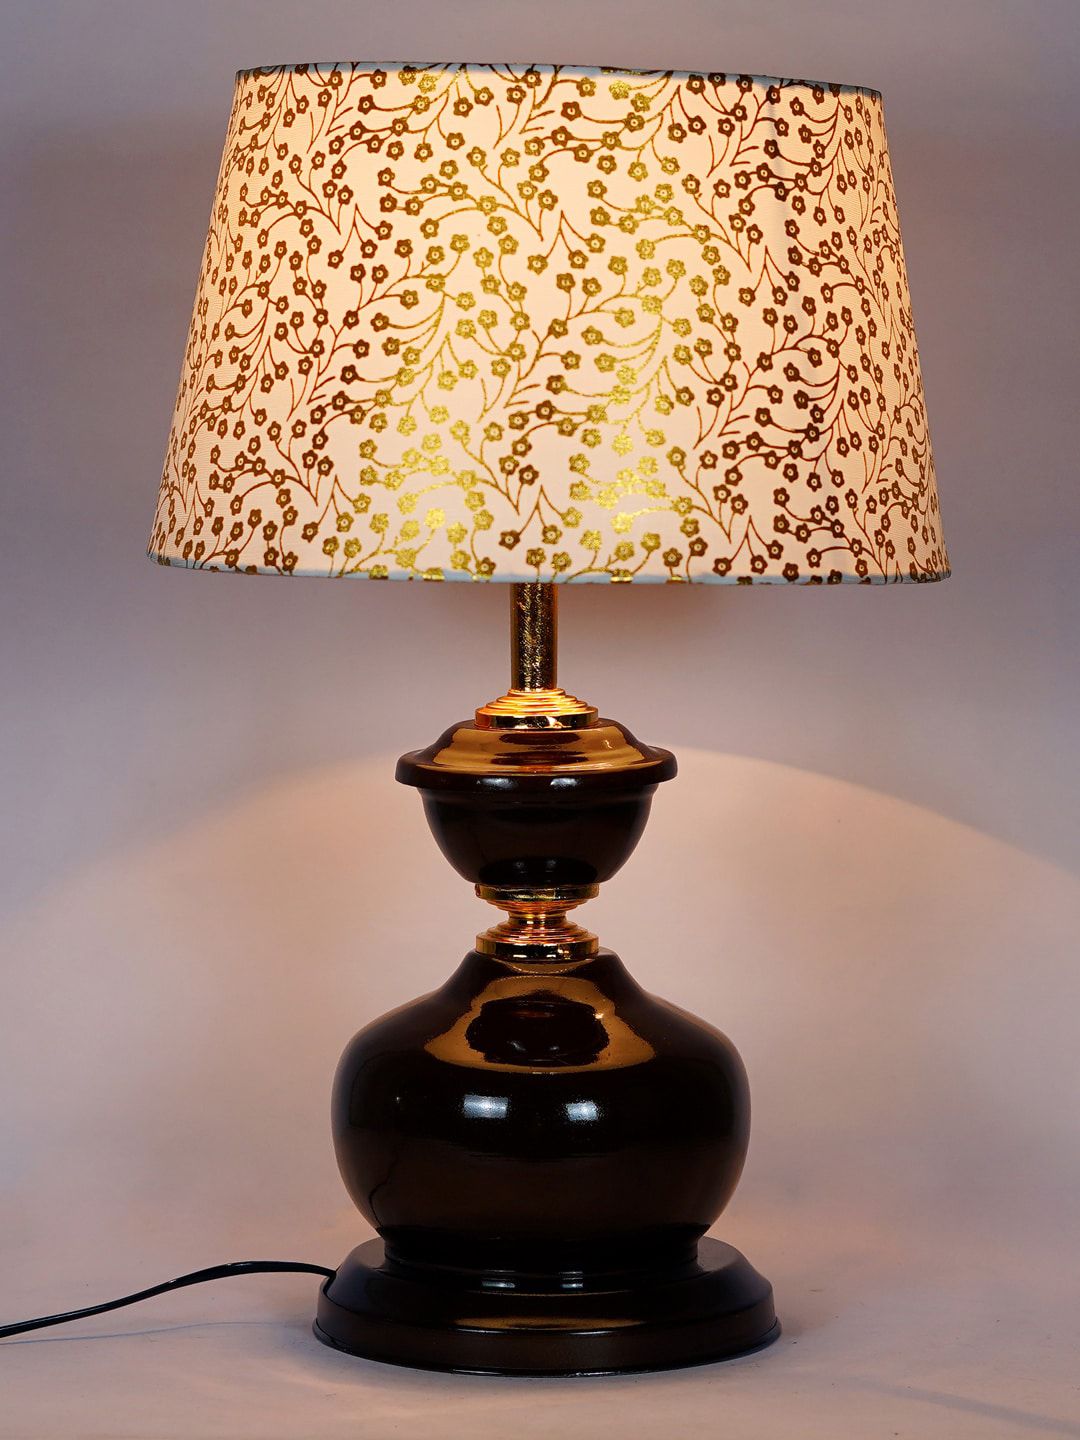 foziq Brown & Gold-Toned Metal Table Lamp Price in India